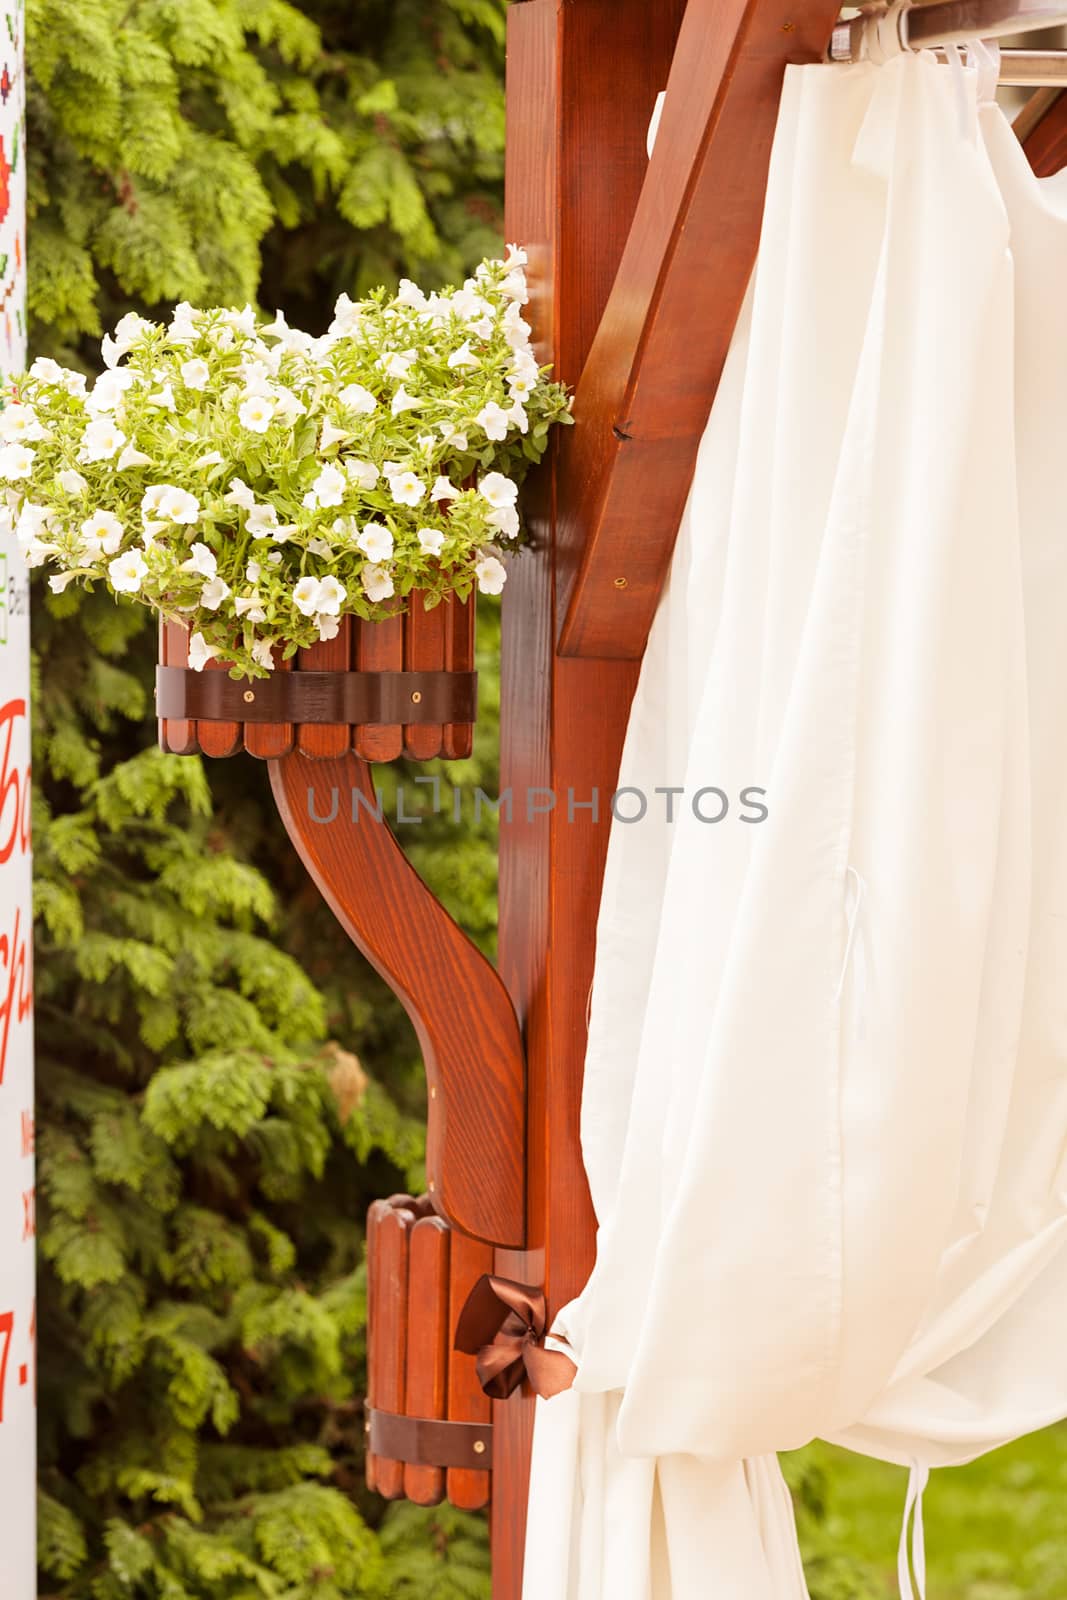 Hanging wooden flower arrangement at the entrance, note shallow depth of field